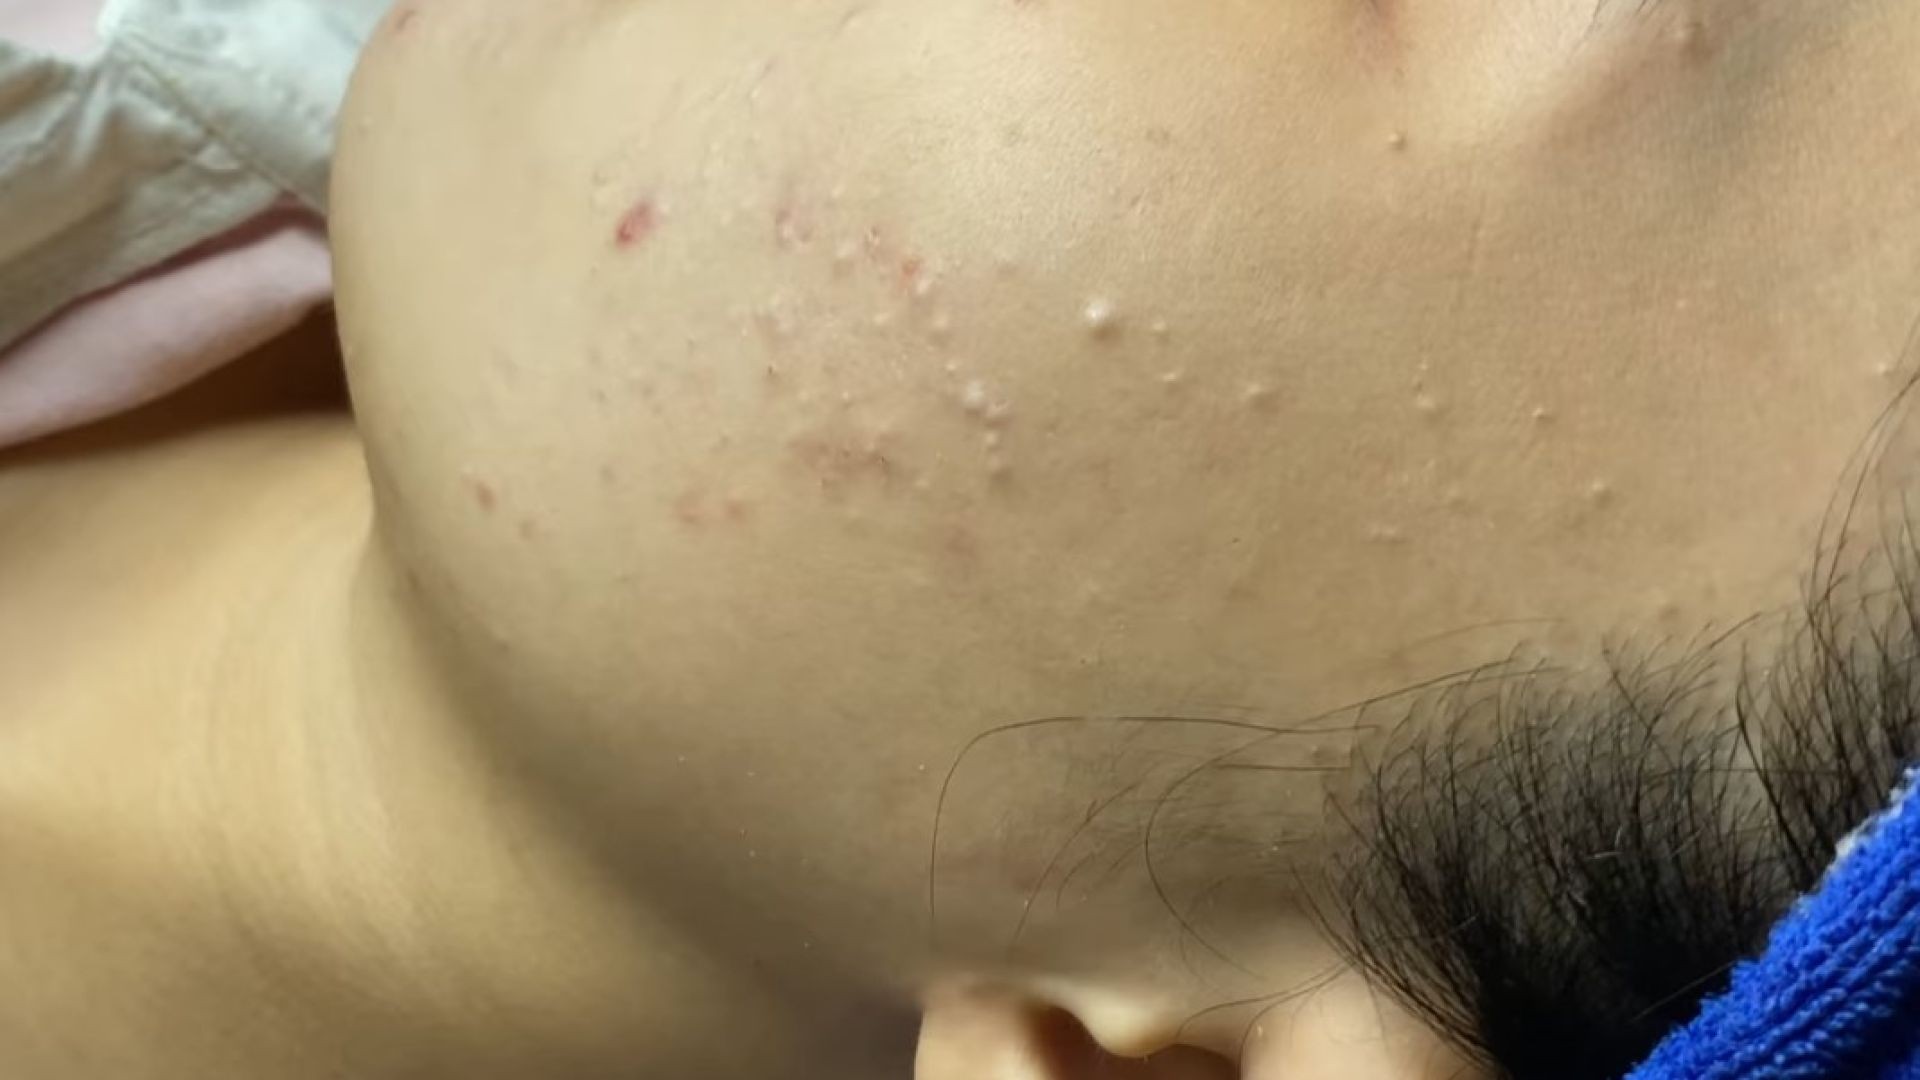 Extractions And Acne - ThuyTruong#86